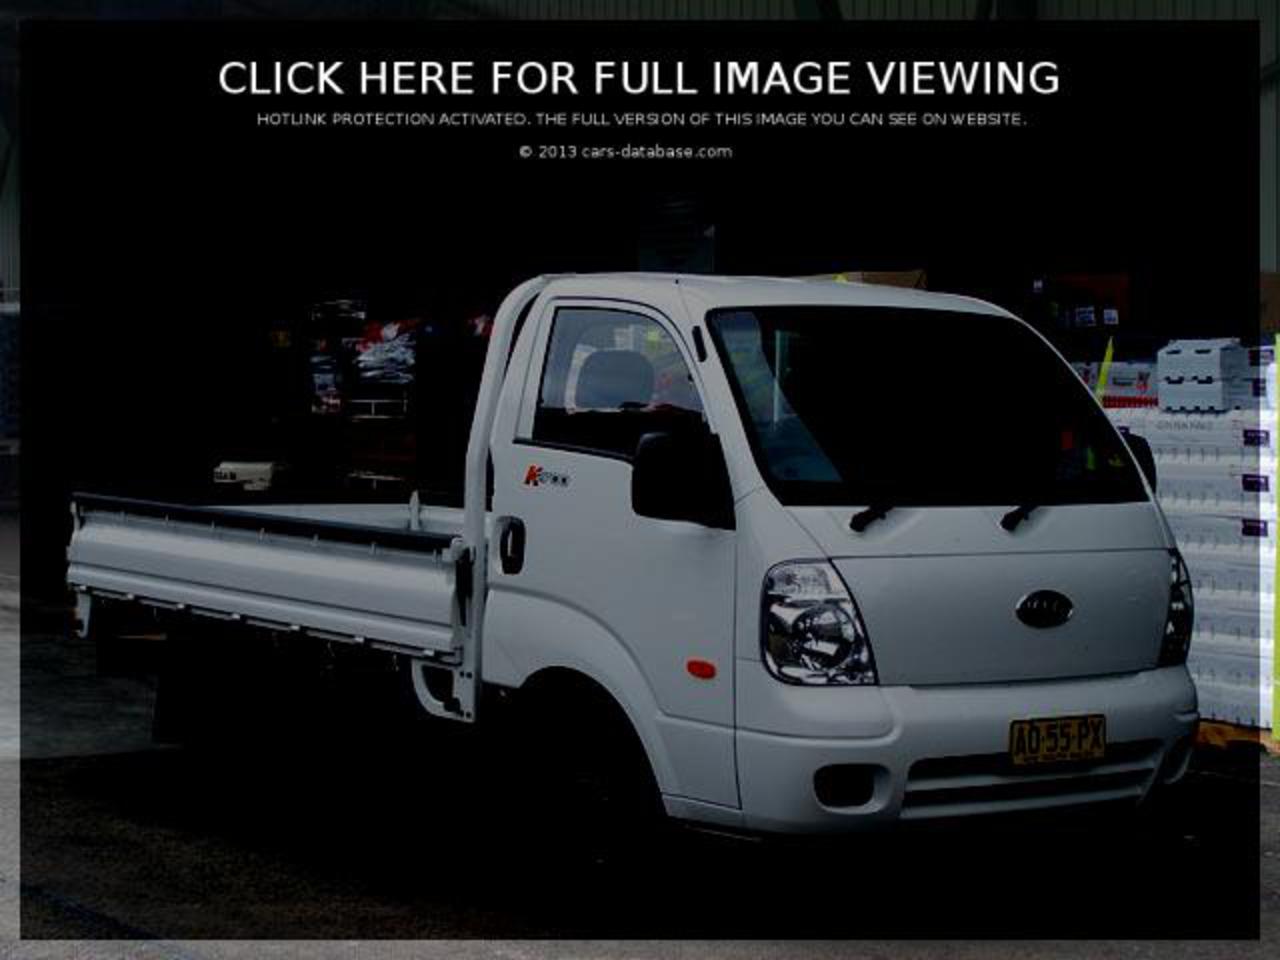 Kia K2700: Information about model, images gallery and complete ...